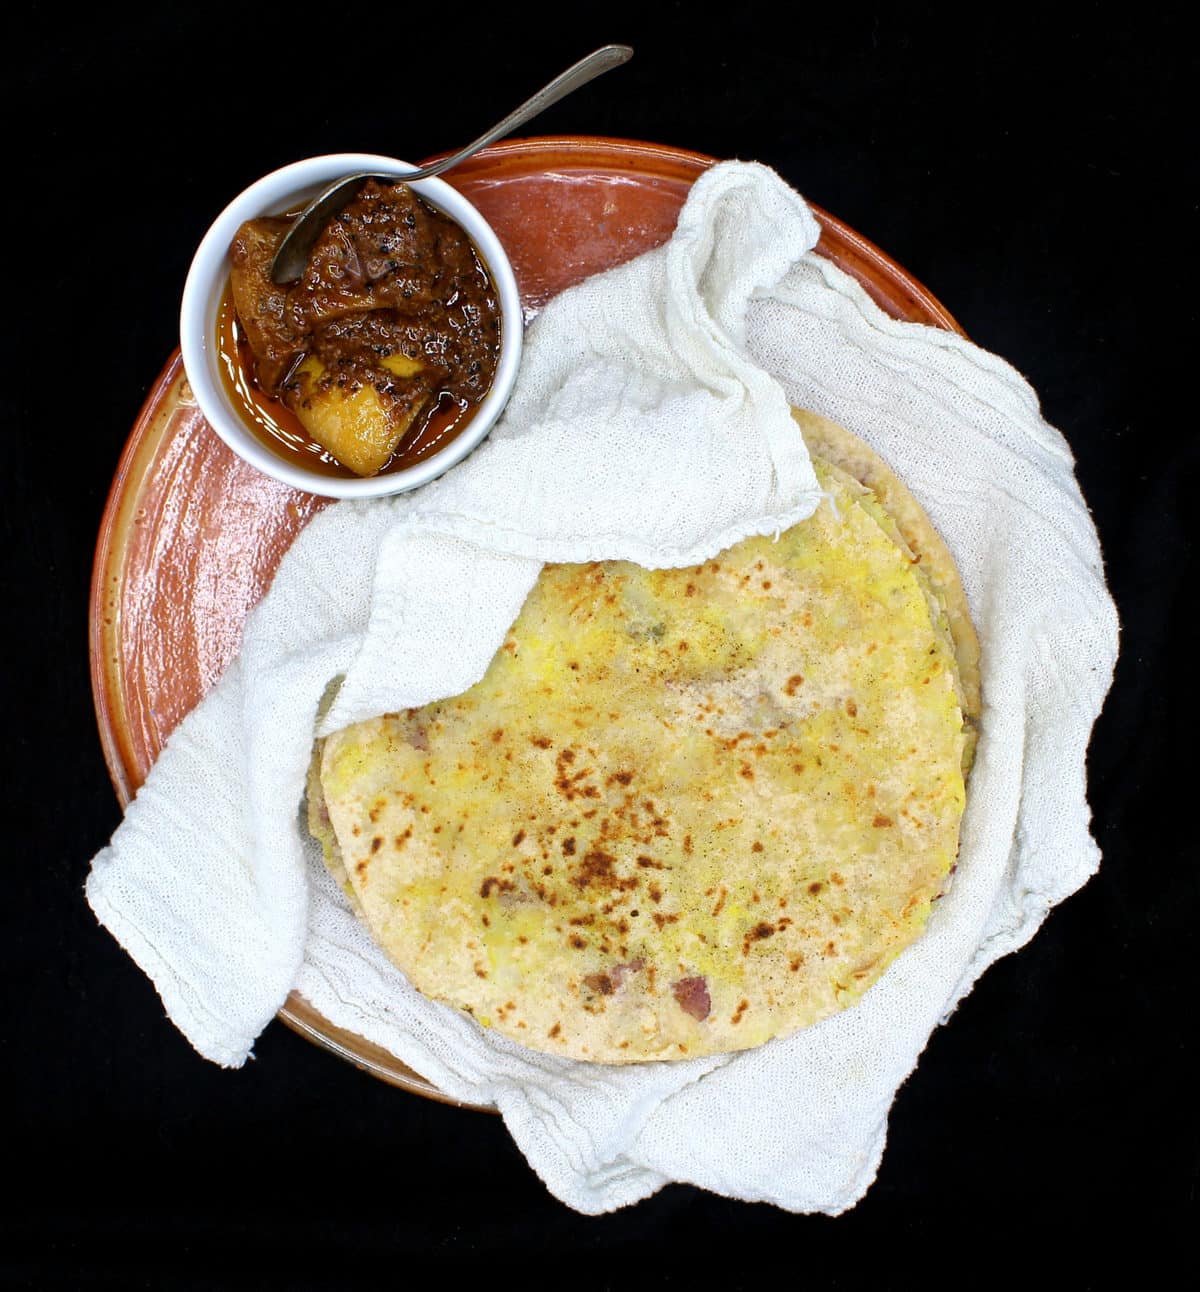 An overhead shot of a stack of freshly baked aloo parathas nestled in a white flour sack towel on an earthenware plate with a small ceramic bowl of Indian lime pickle on the side, all on a black background.